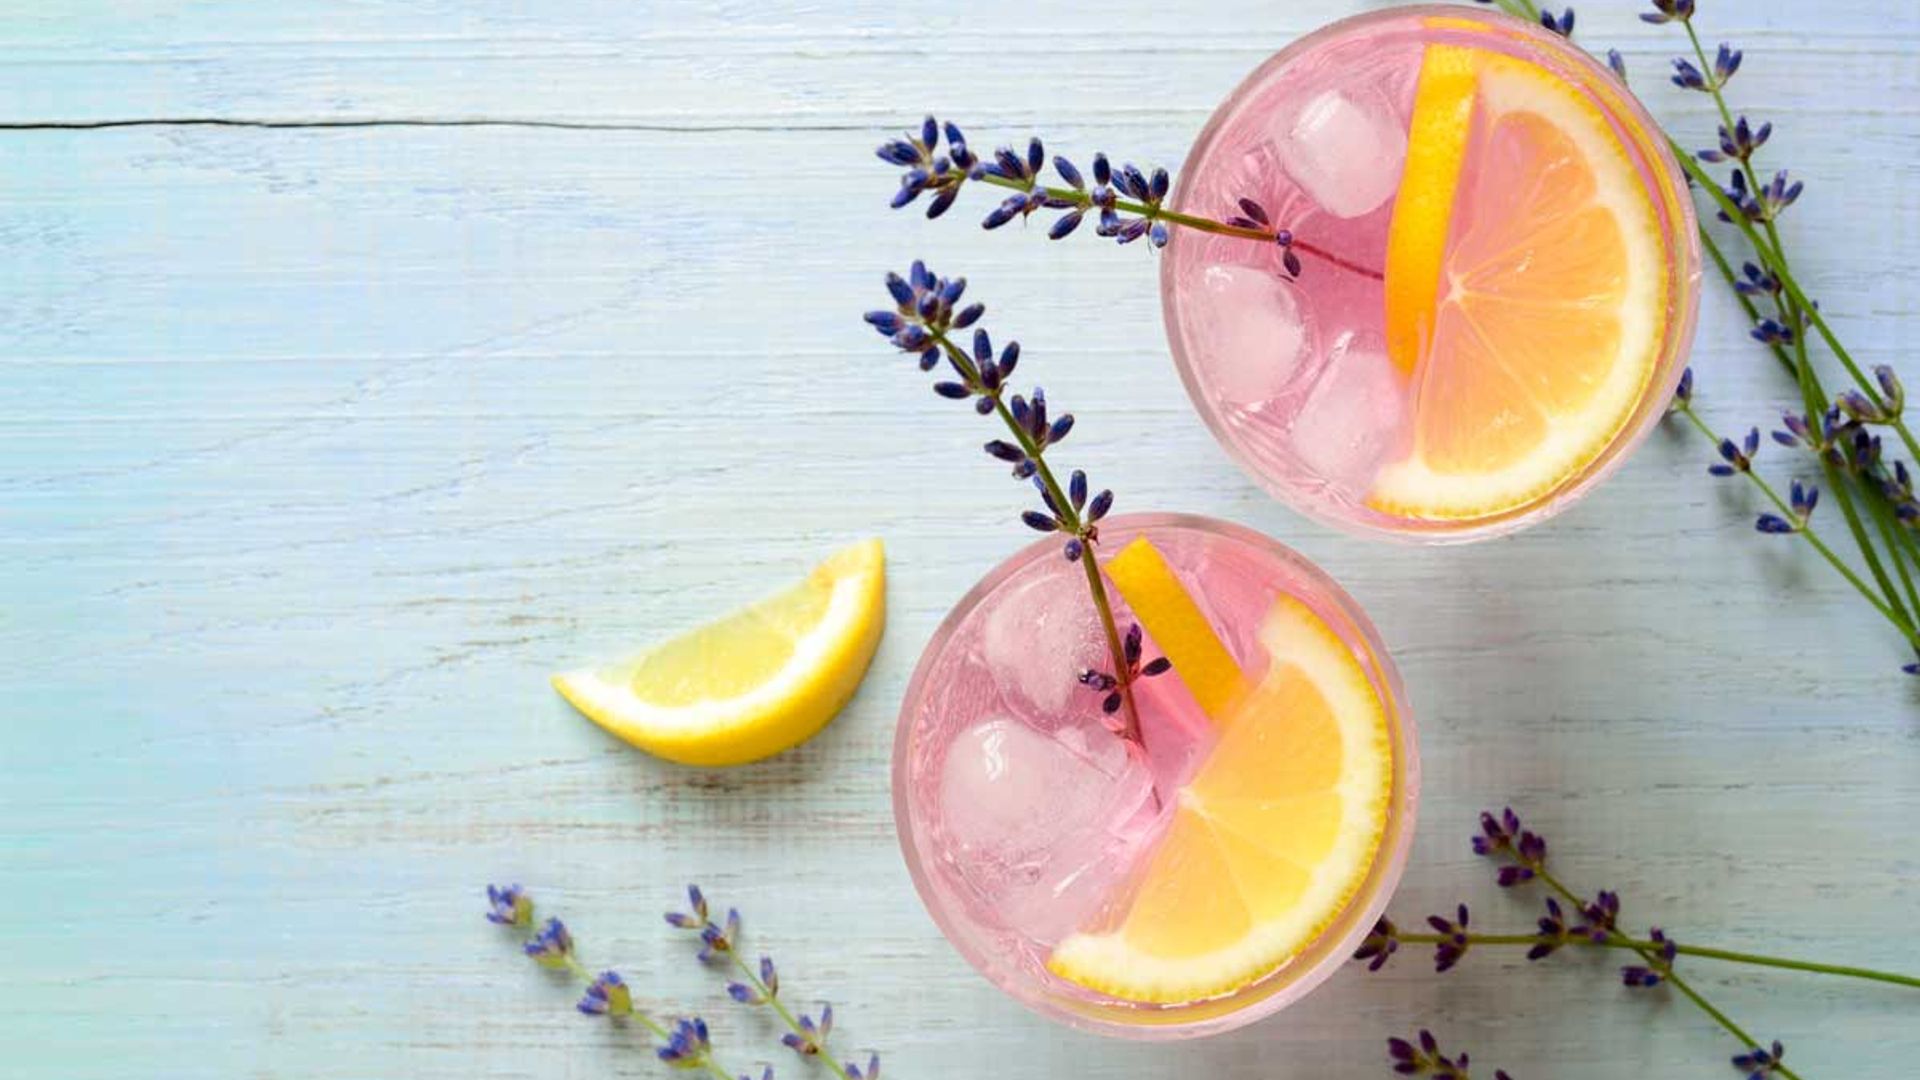 26 Big Batch Cocktails for Any Kind of Party 2023